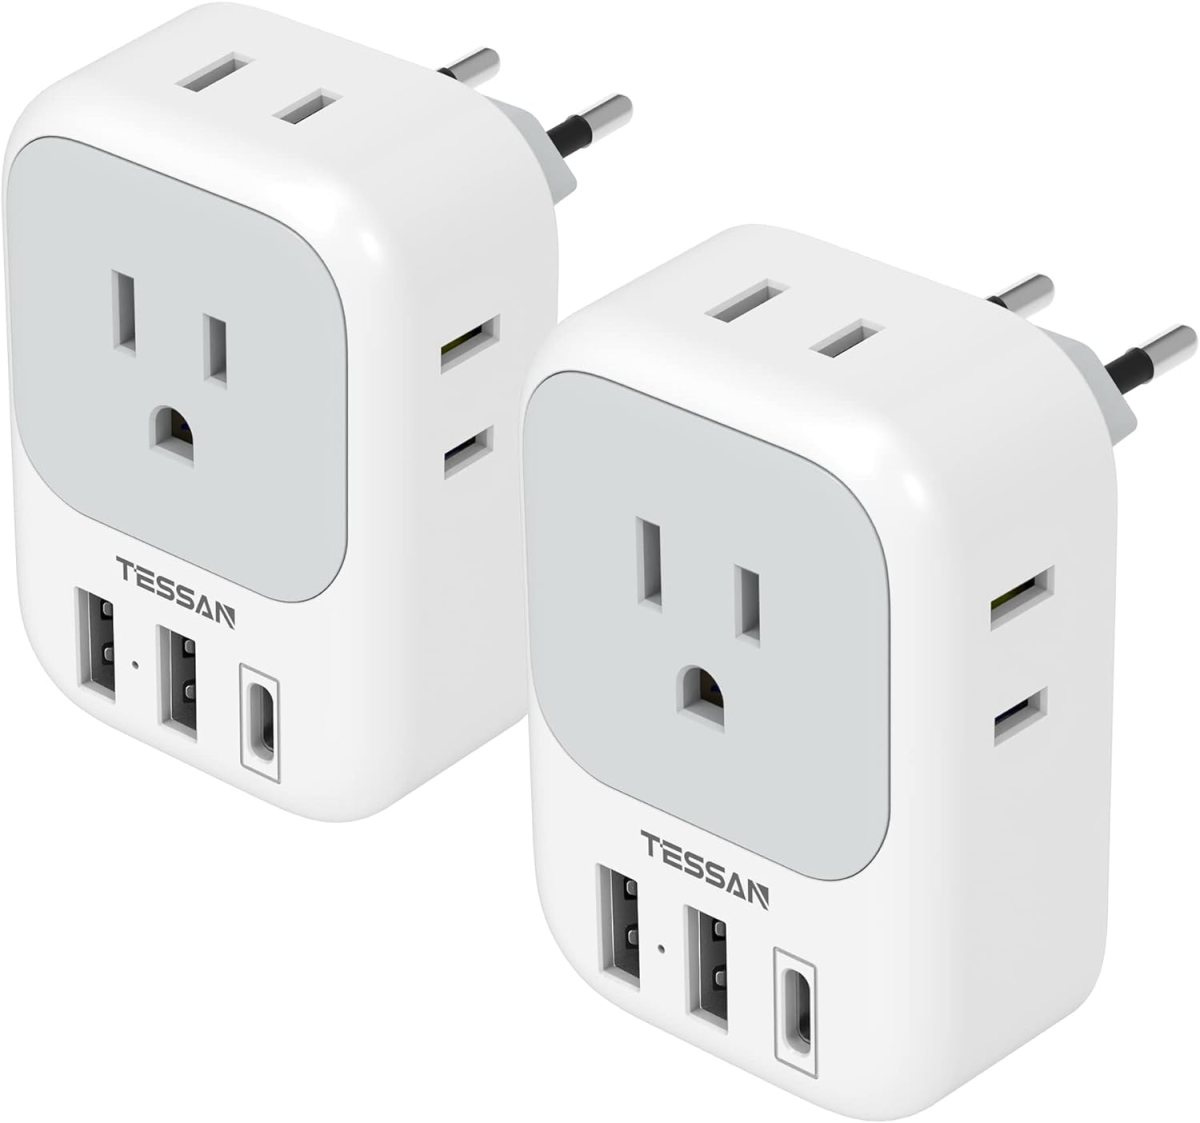 What electrical plug adapter do I need for Italy?